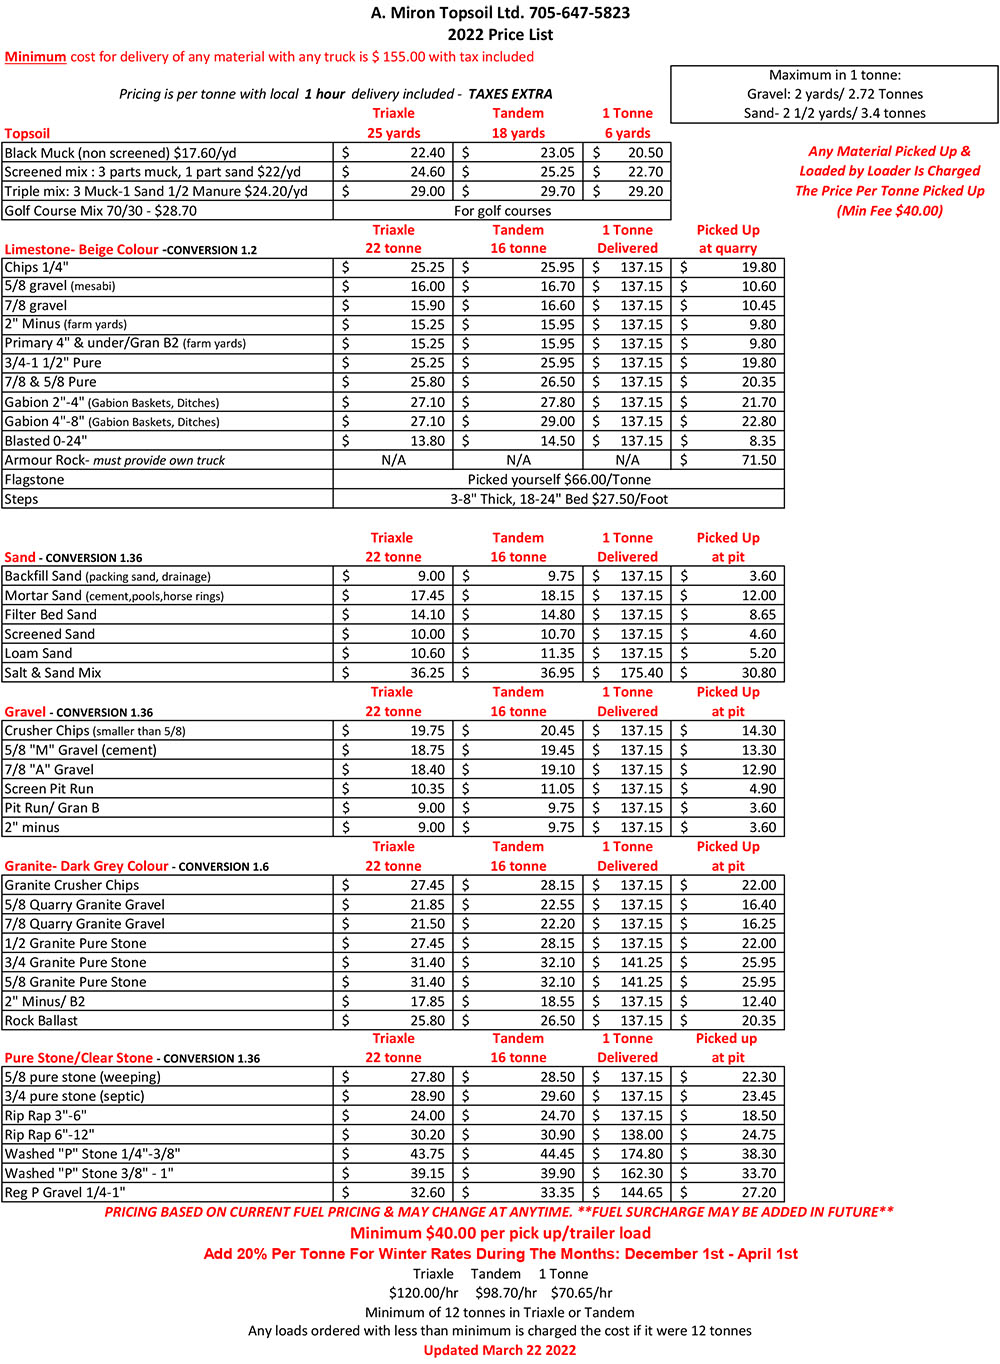 Aggregate Price List at A. Miront Topsoil